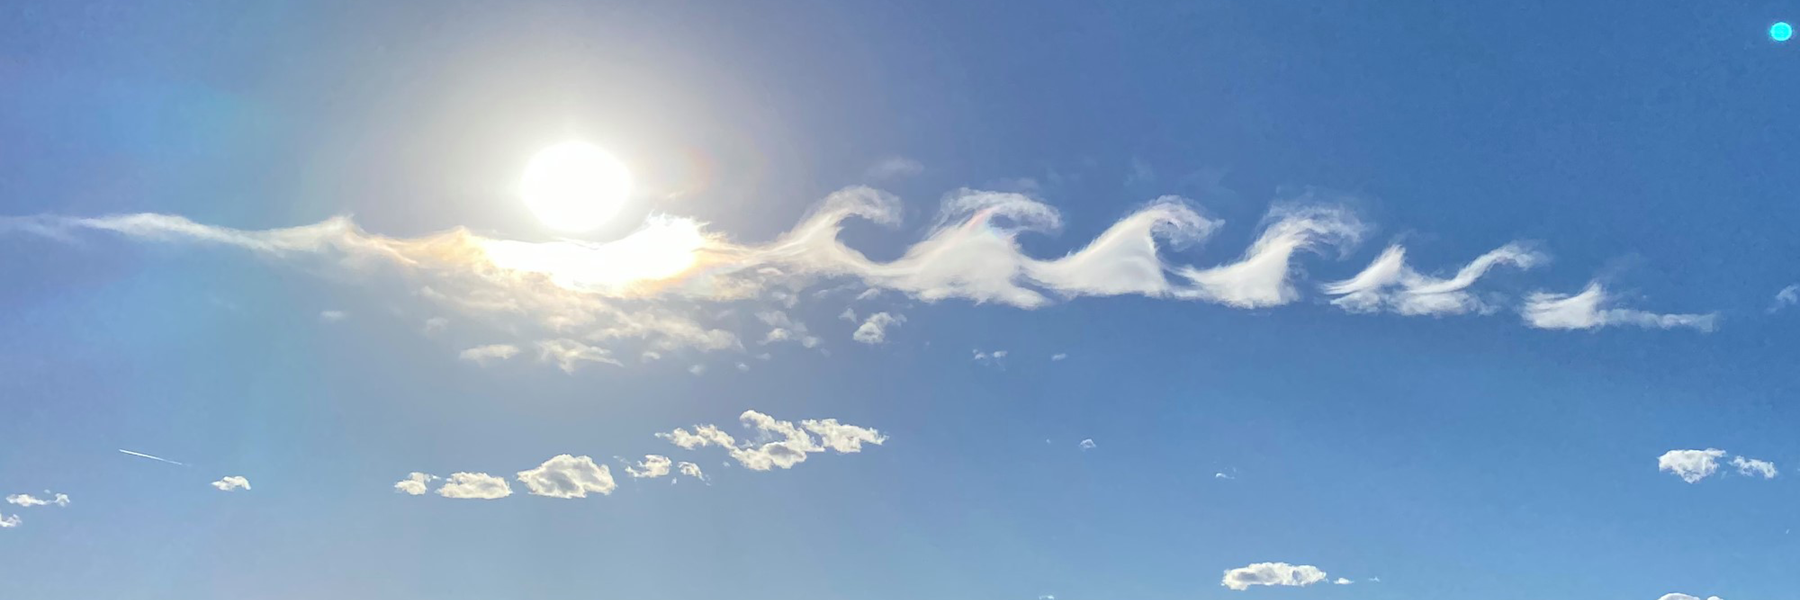 Blue sky with sun and wave clouds